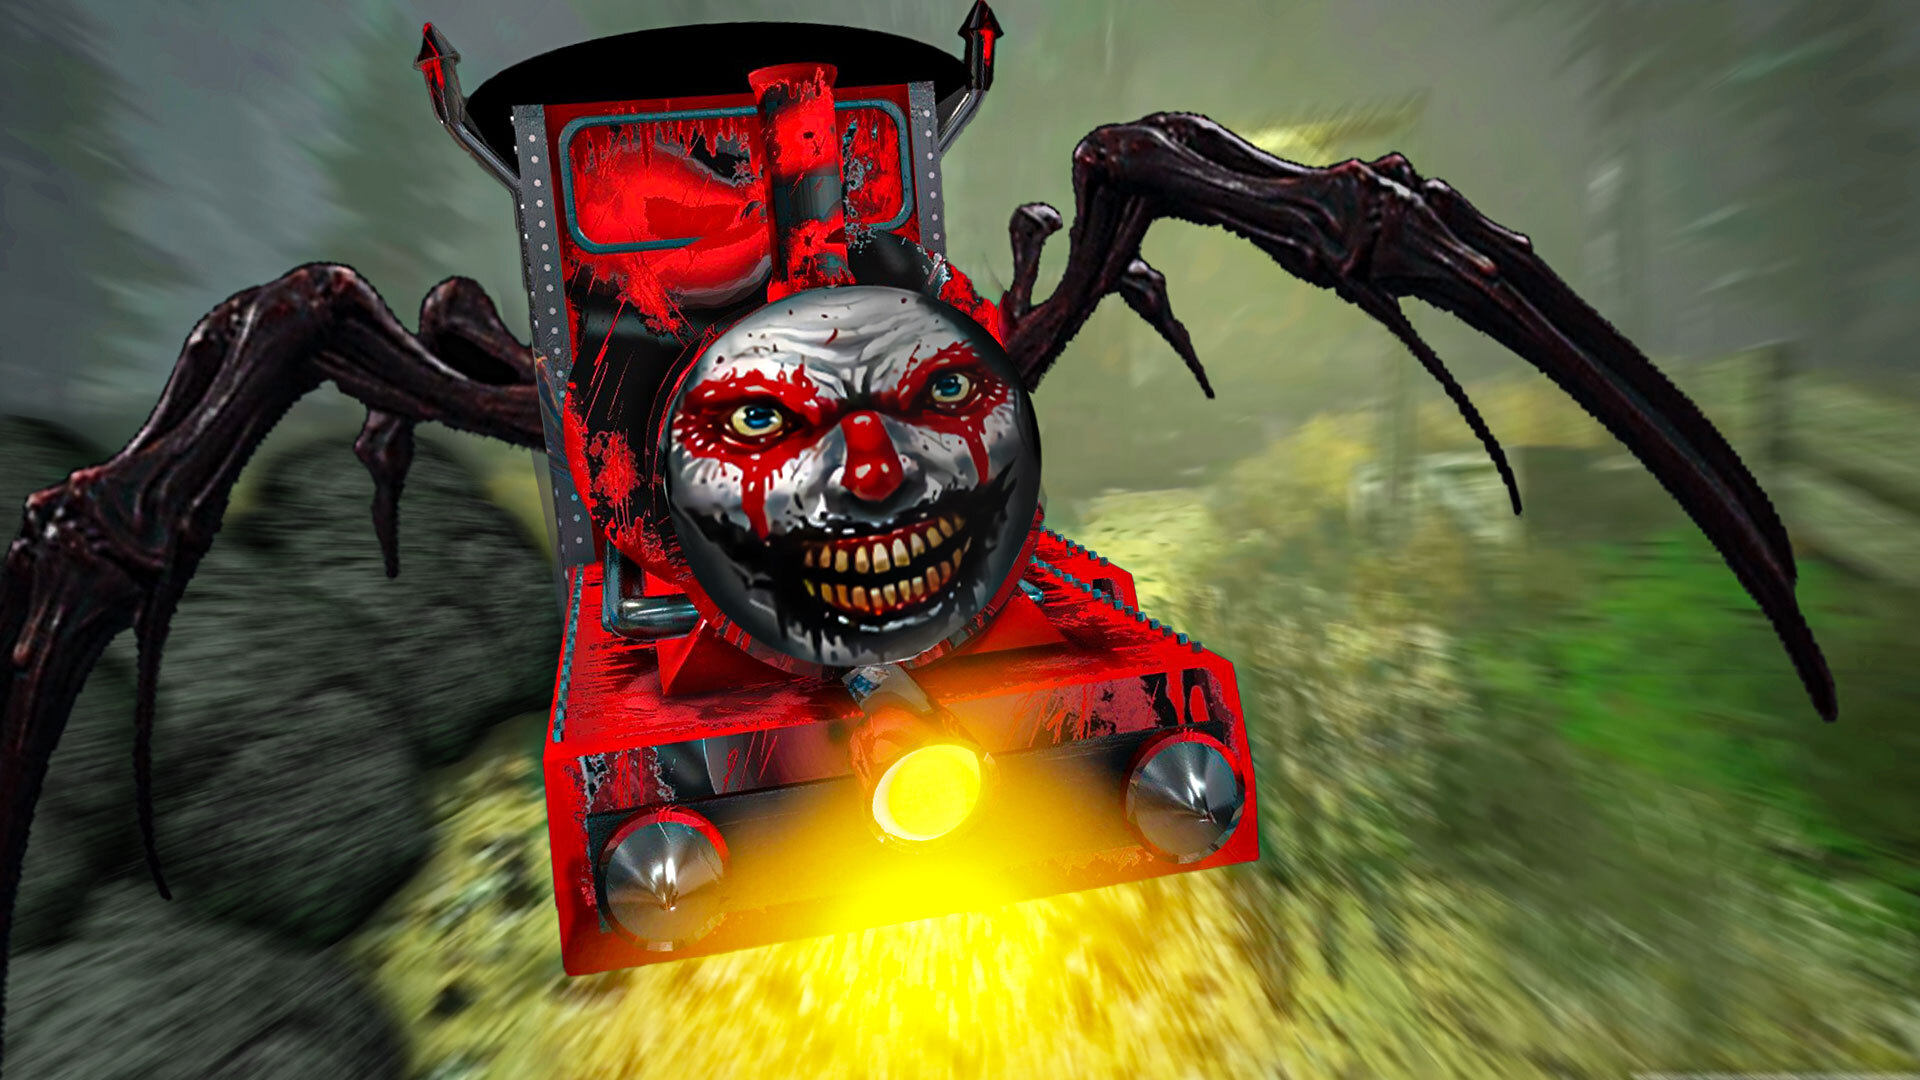 Spider-train horror game Choo-Choo Charles coming to consoles - Polygon